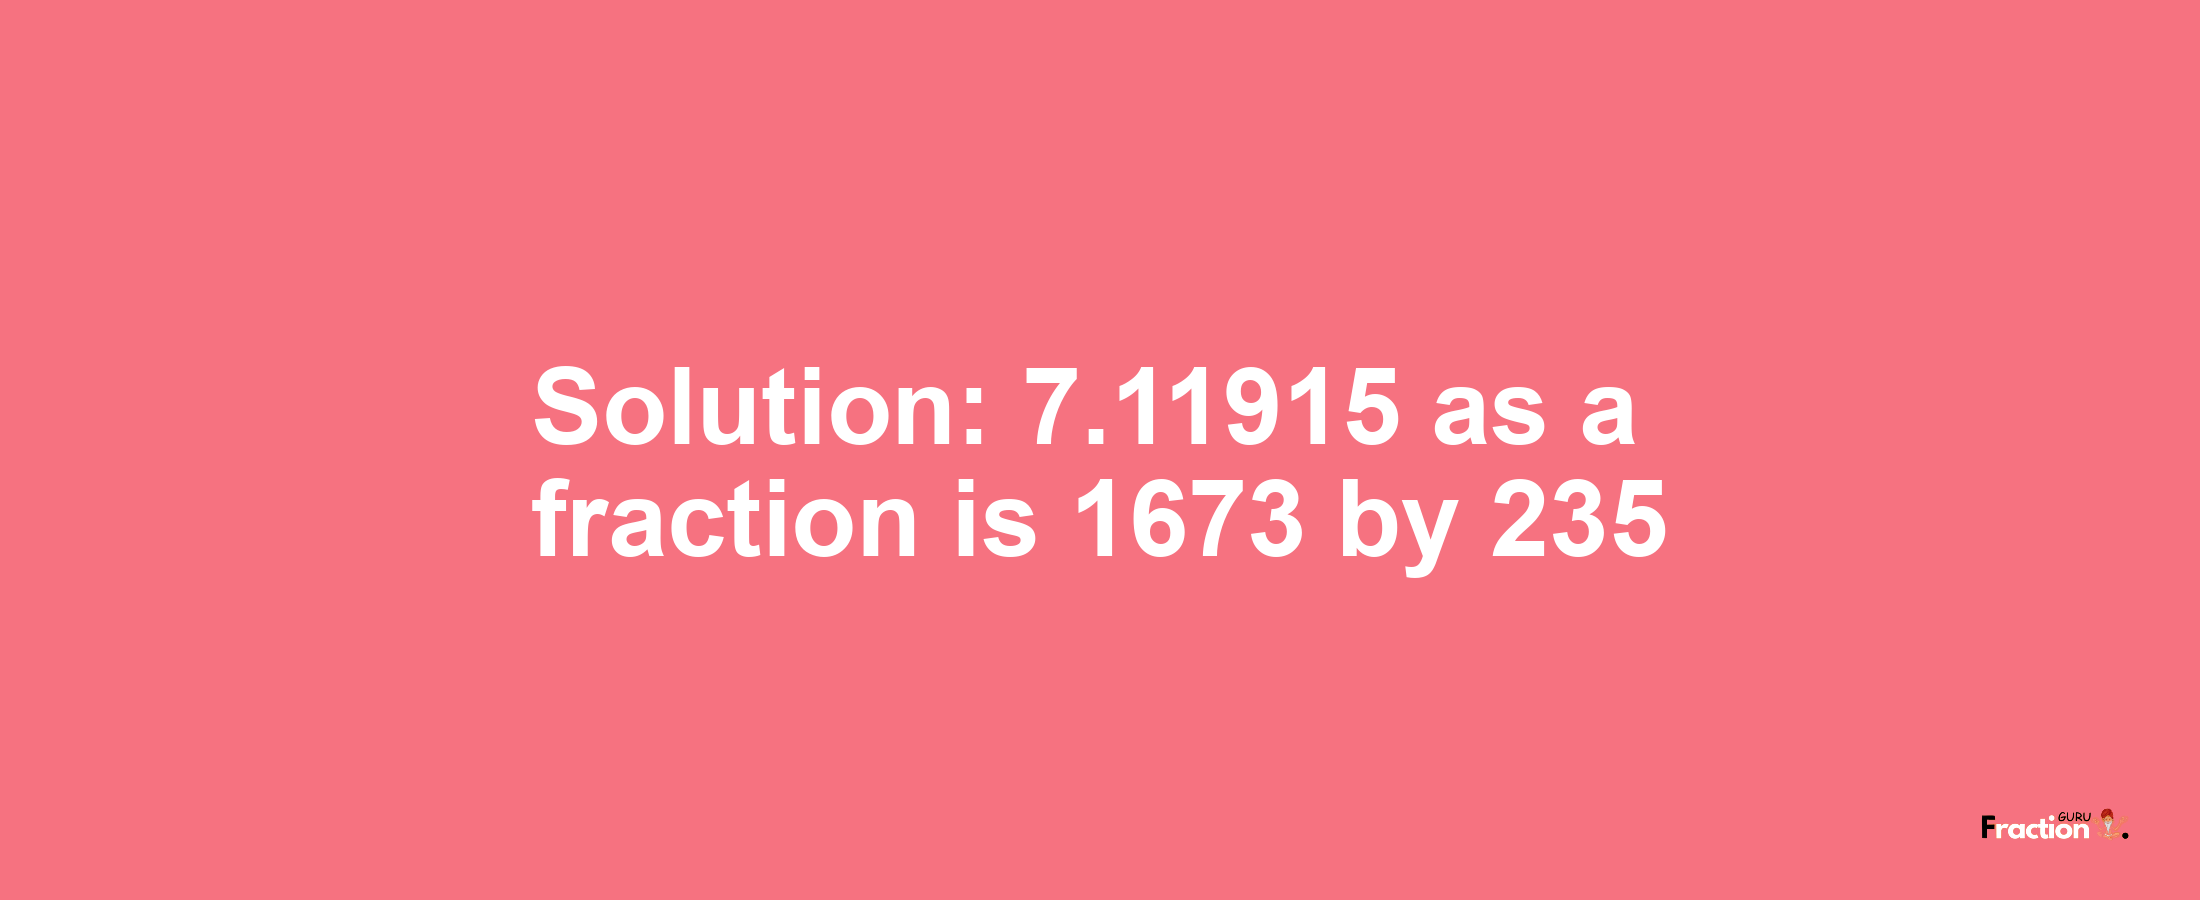 Solution:7.11915 as a fraction is 1673/235